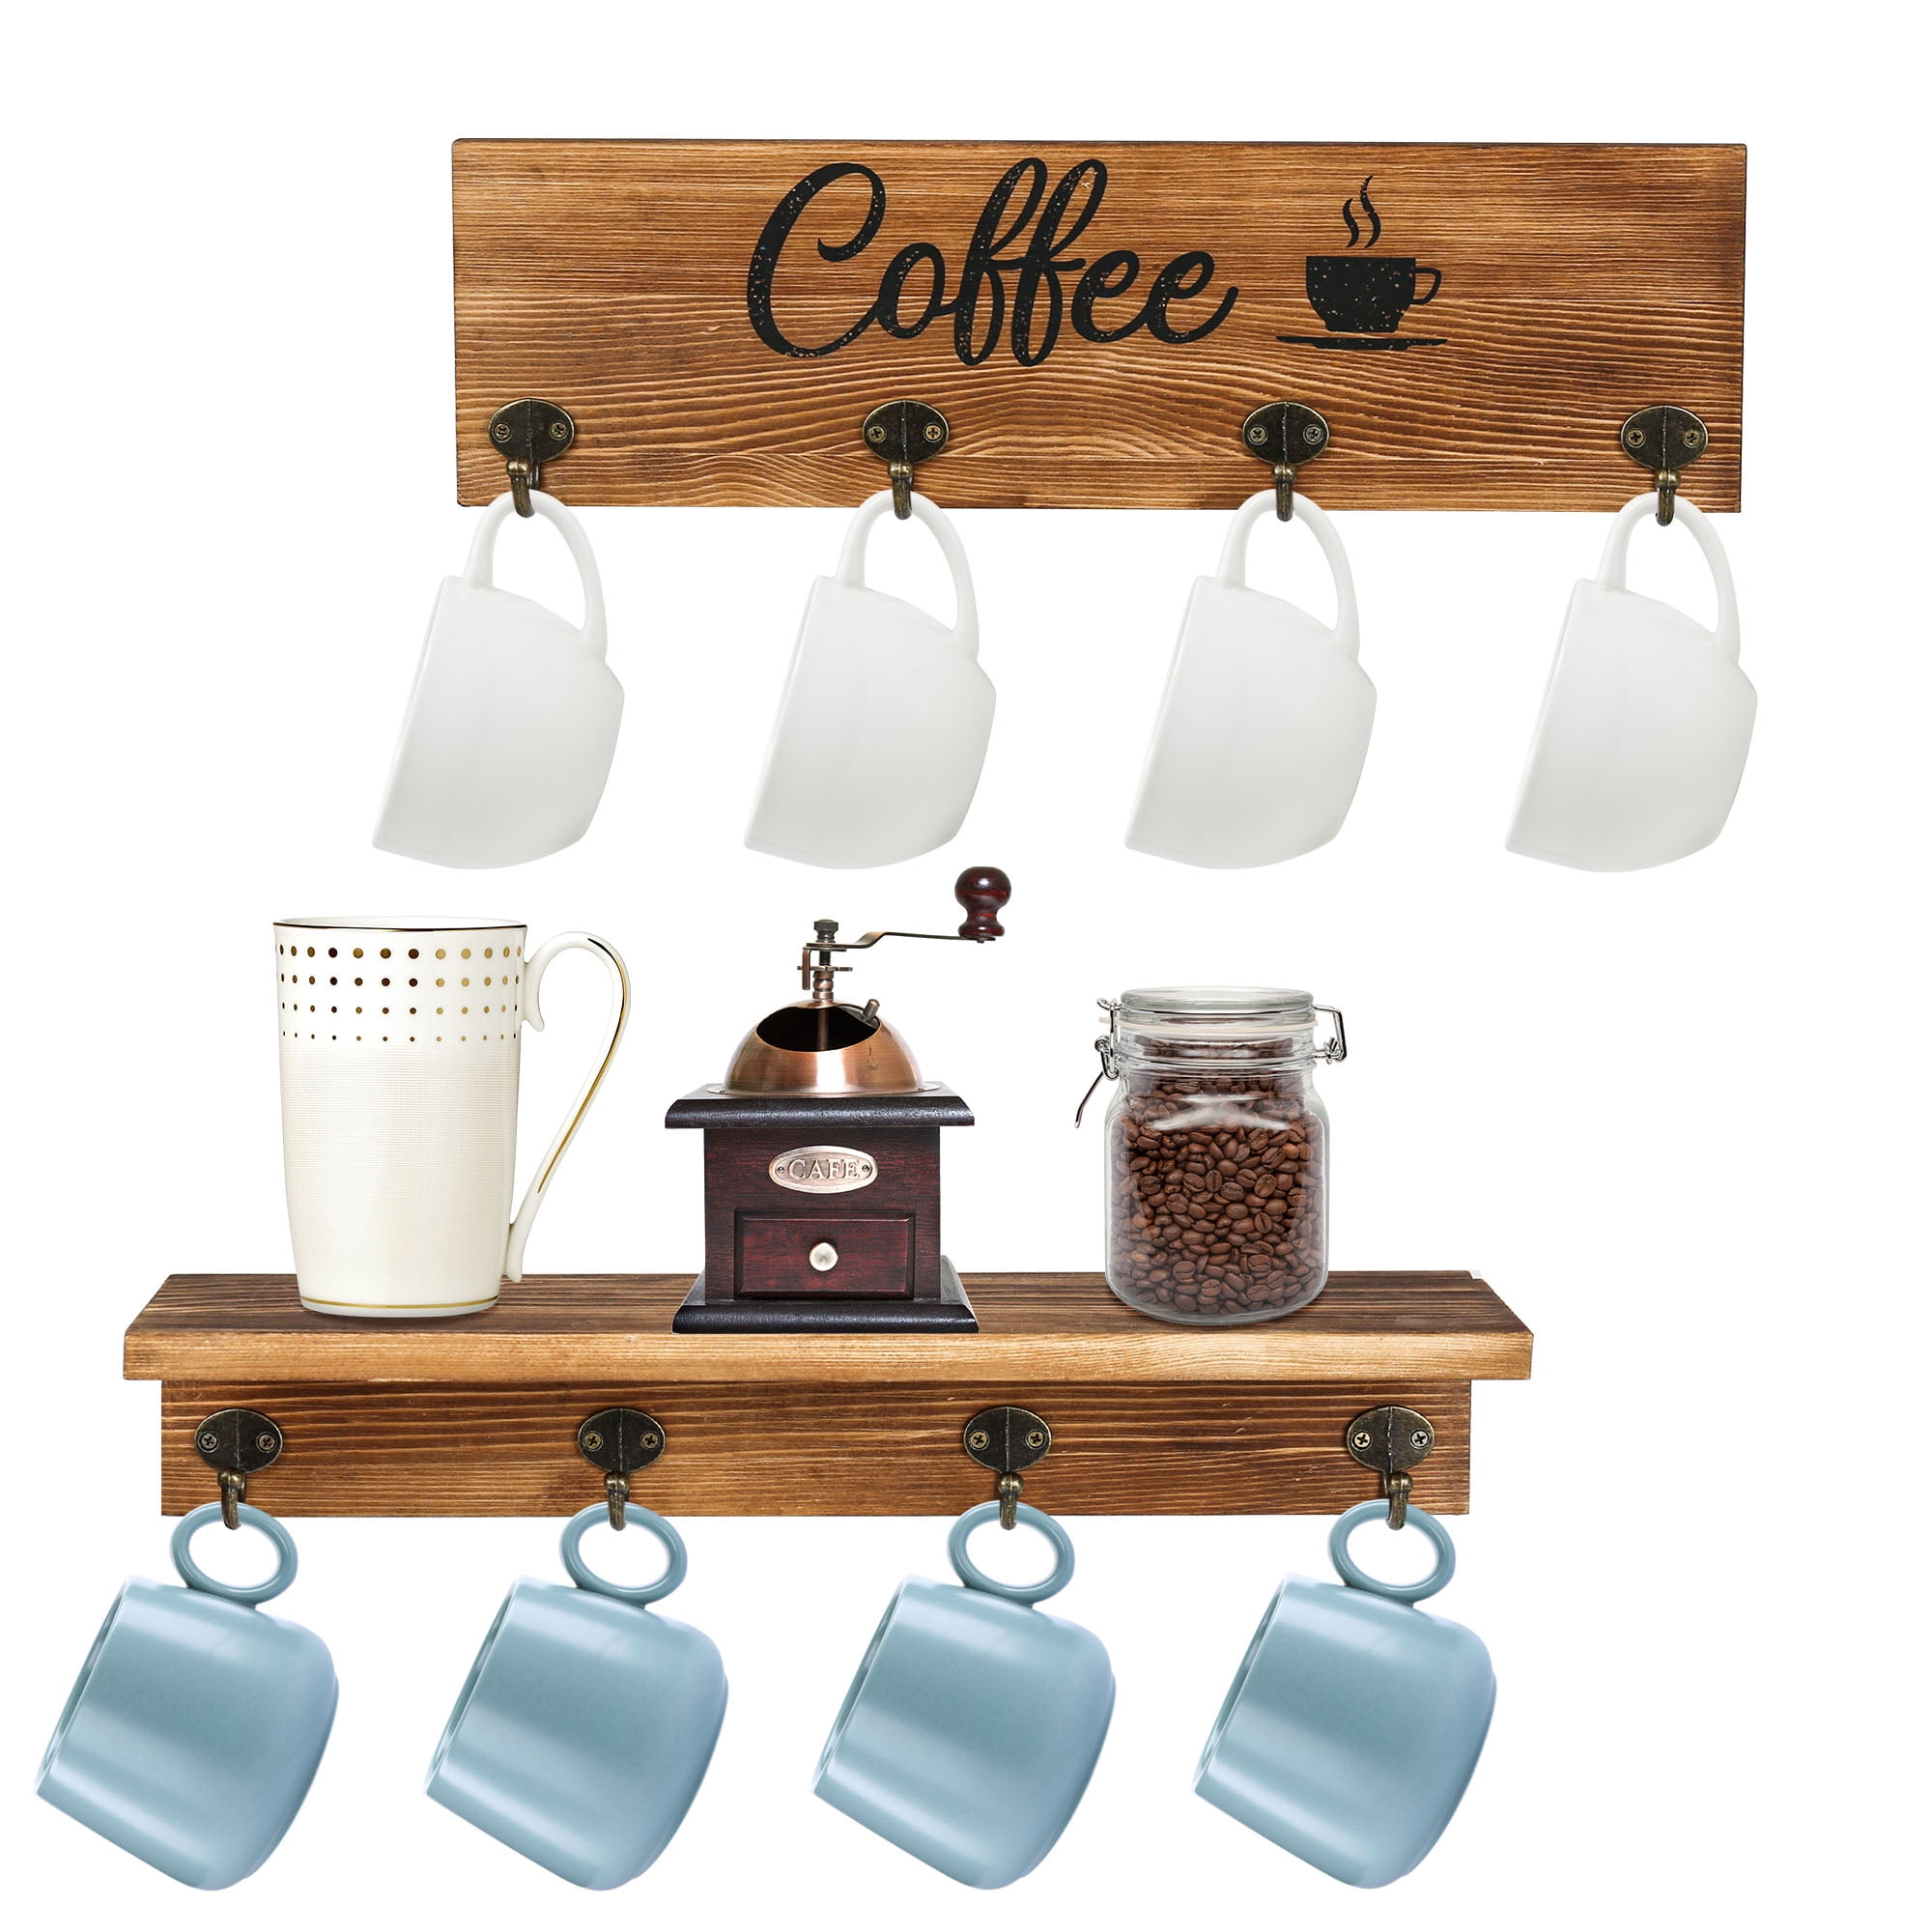 Travelwant Coffee Mug Holder, Metal Cup Rack Tree 6 Hooks Kitchen Counter Storage Mugs Stand with Display Organizer and Removable Basket for Coffee